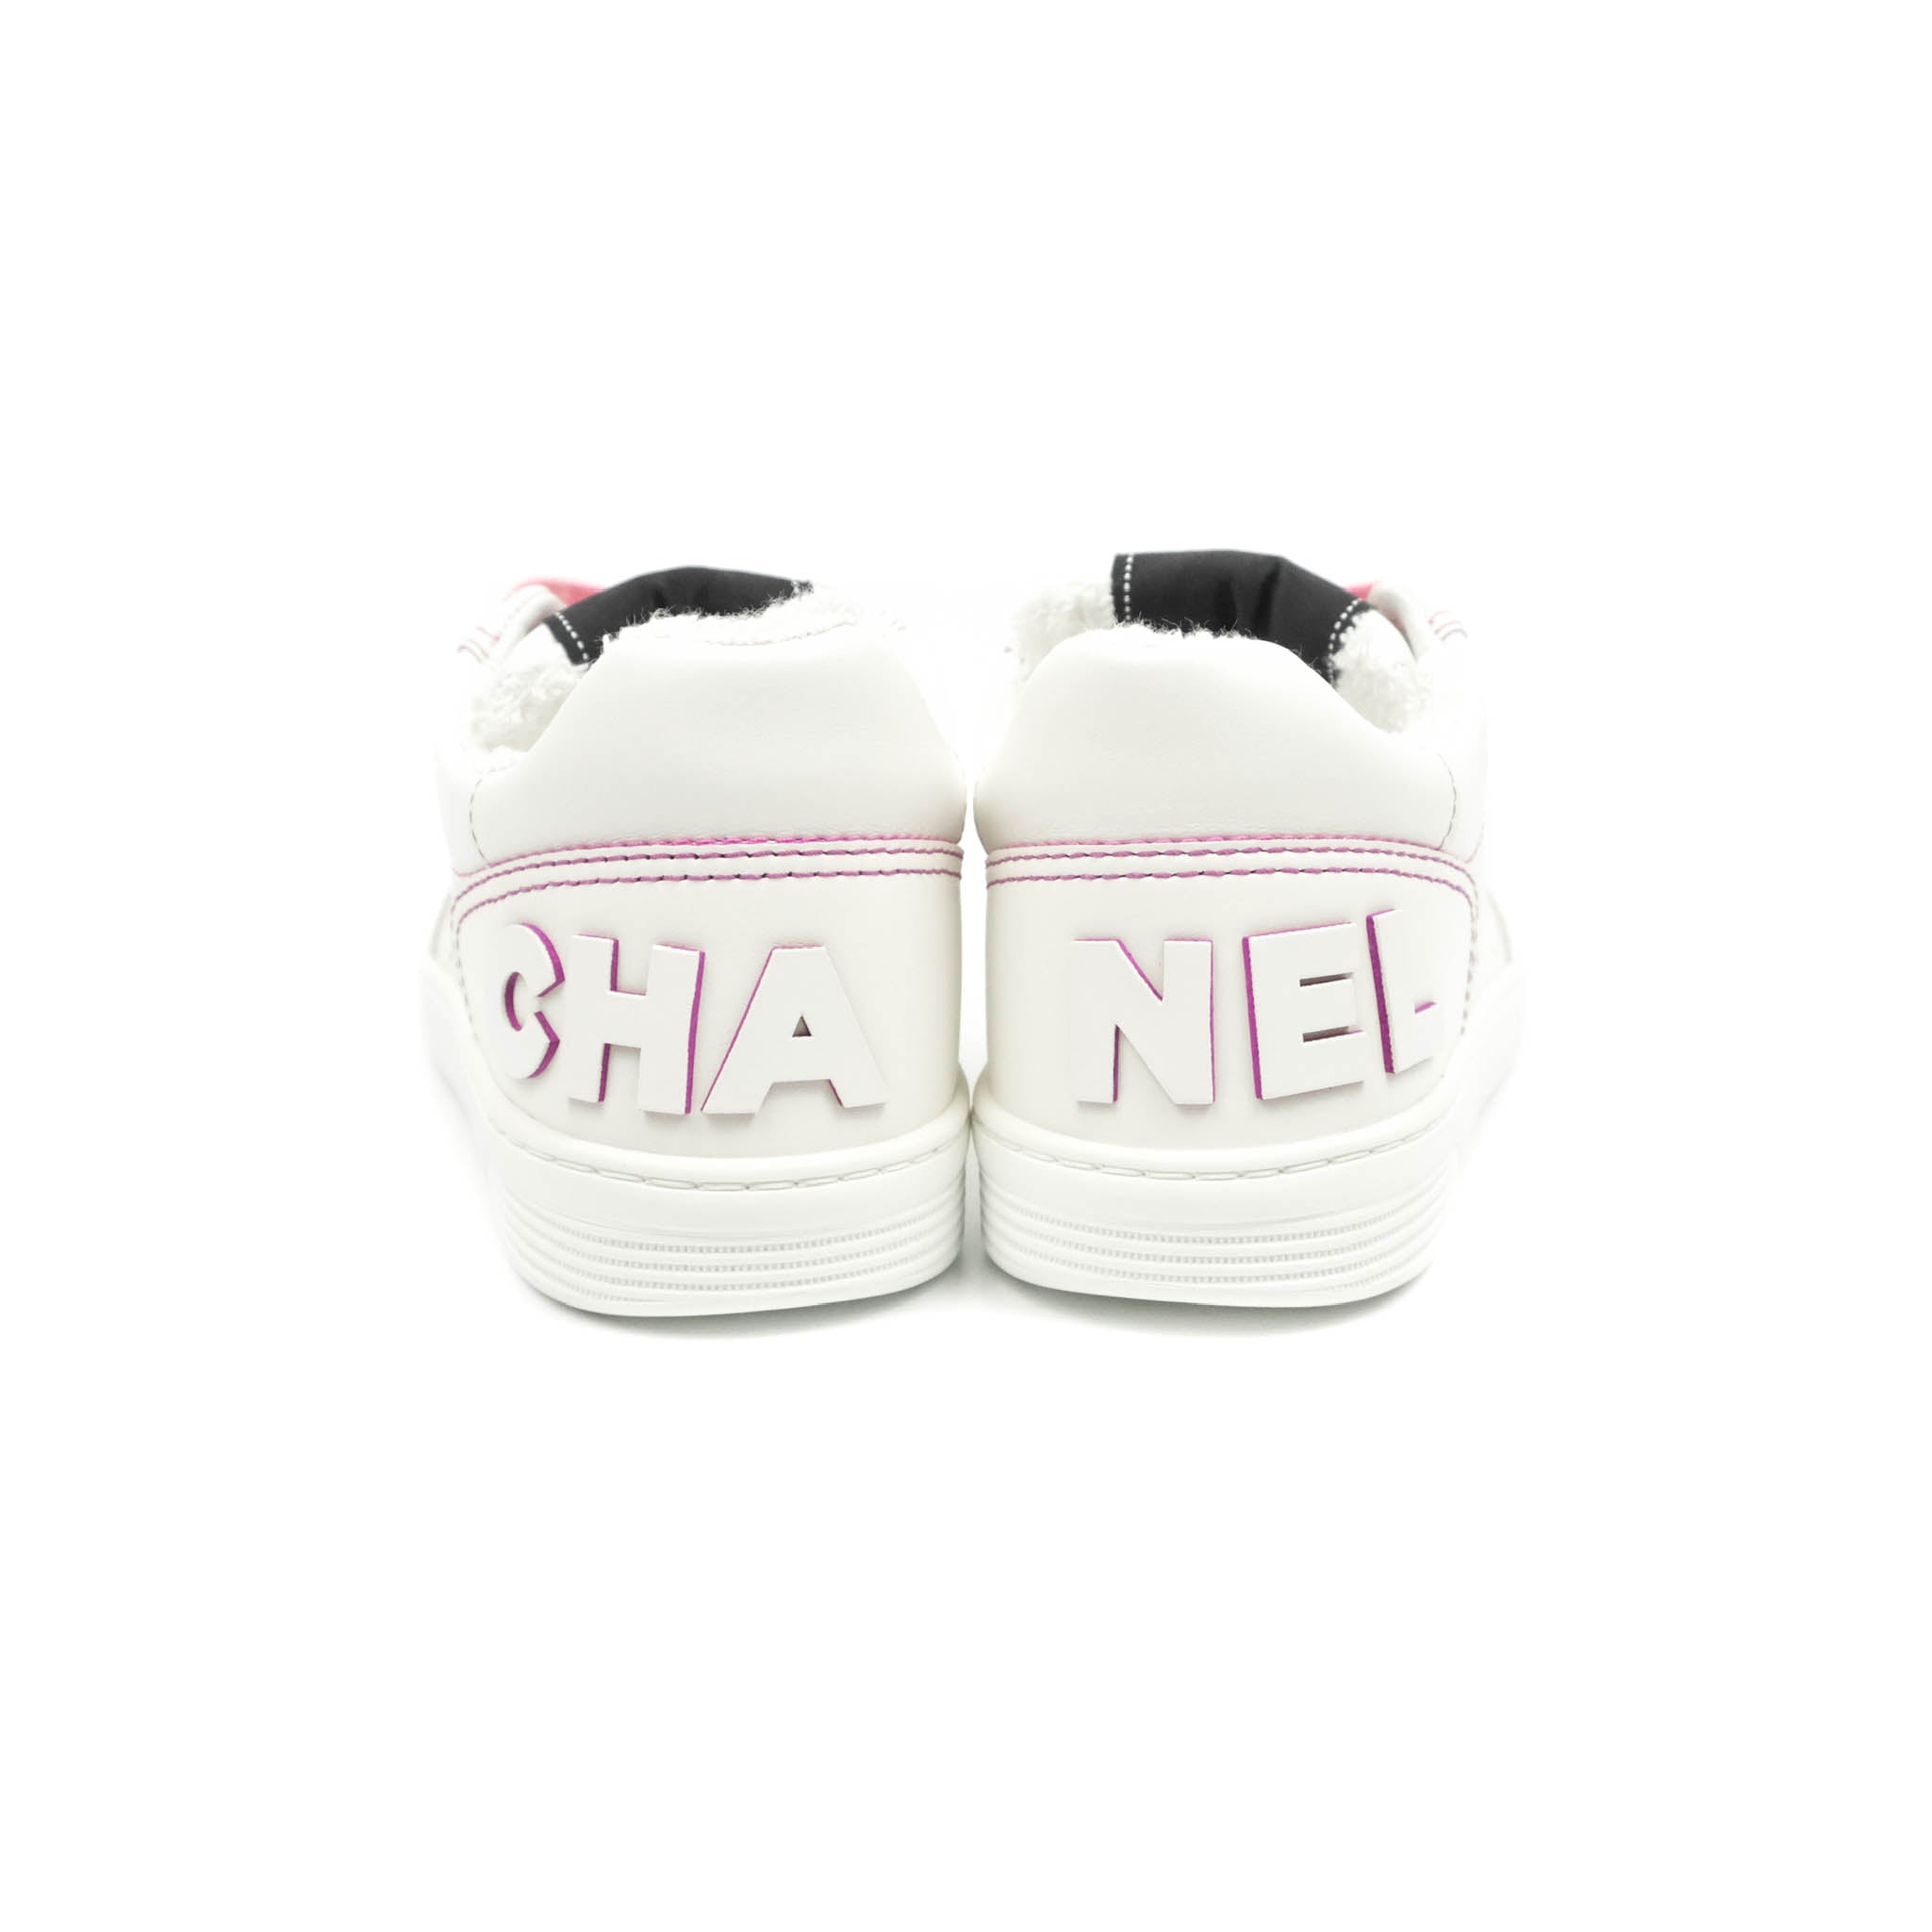 Chanel Calfskin Logo Sneakers White Pink Size 36.5 – Coco Approved Studio